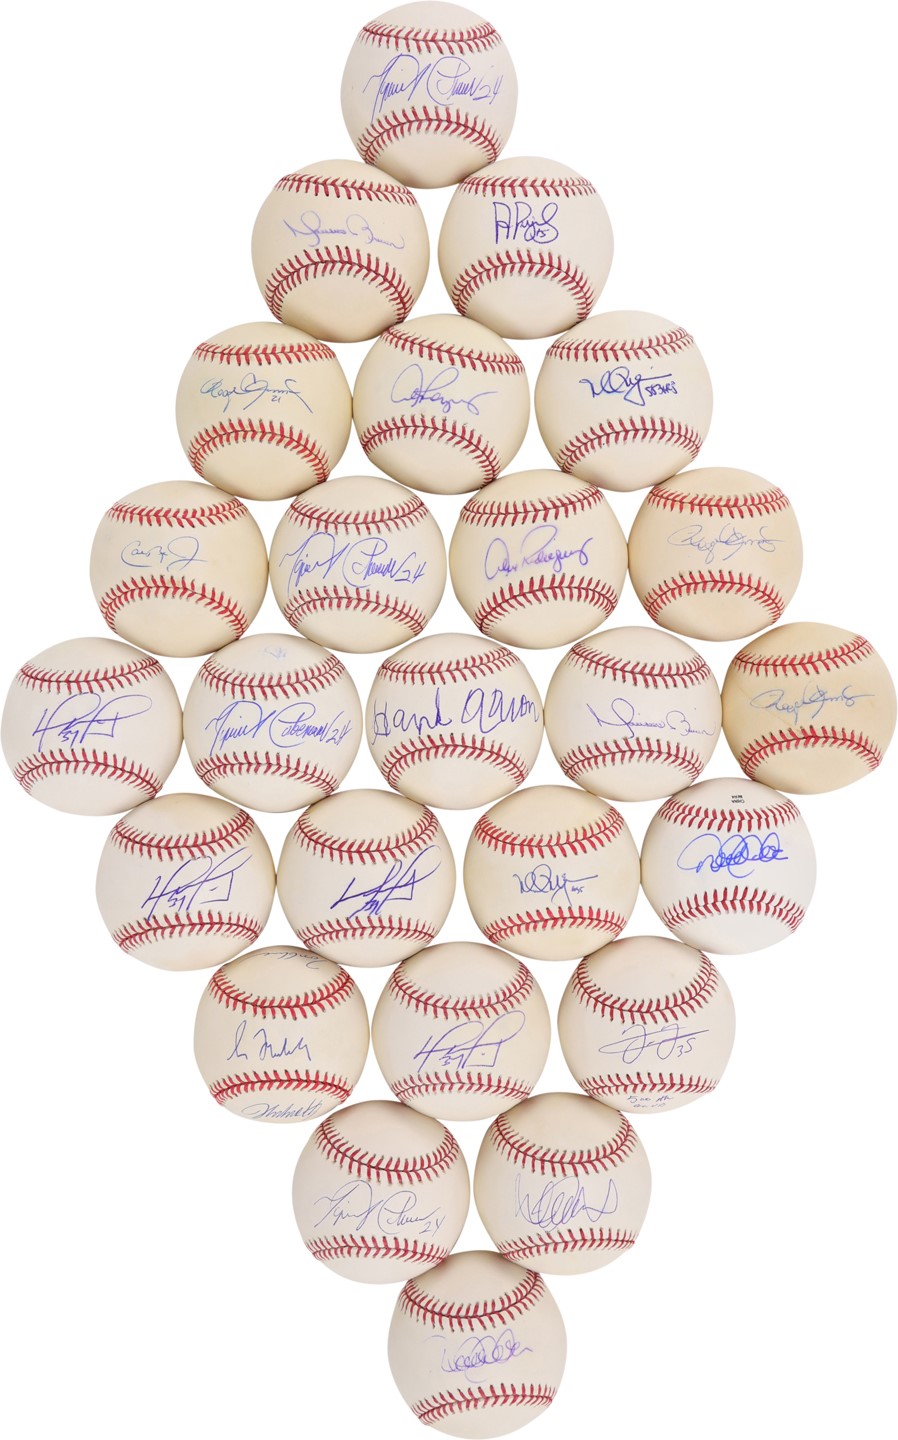 - Hall of Famers and Stars Signed Baseballs from The Cito Gaston Collection (159)